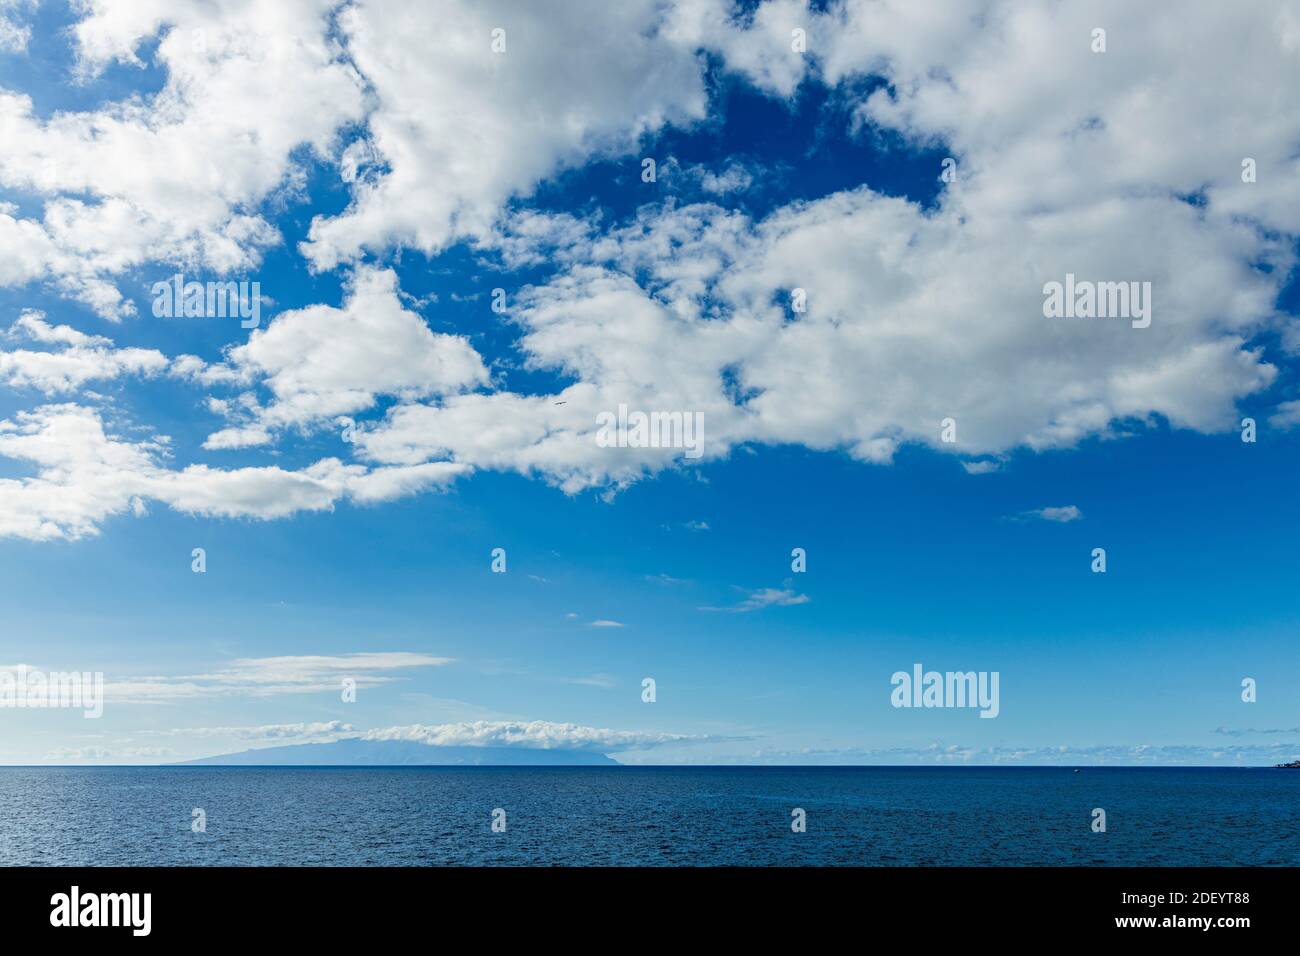 Looking west to the island of La Gomera from Palm Mar, Tenerife, Canary Islands, Spain Stock Photo